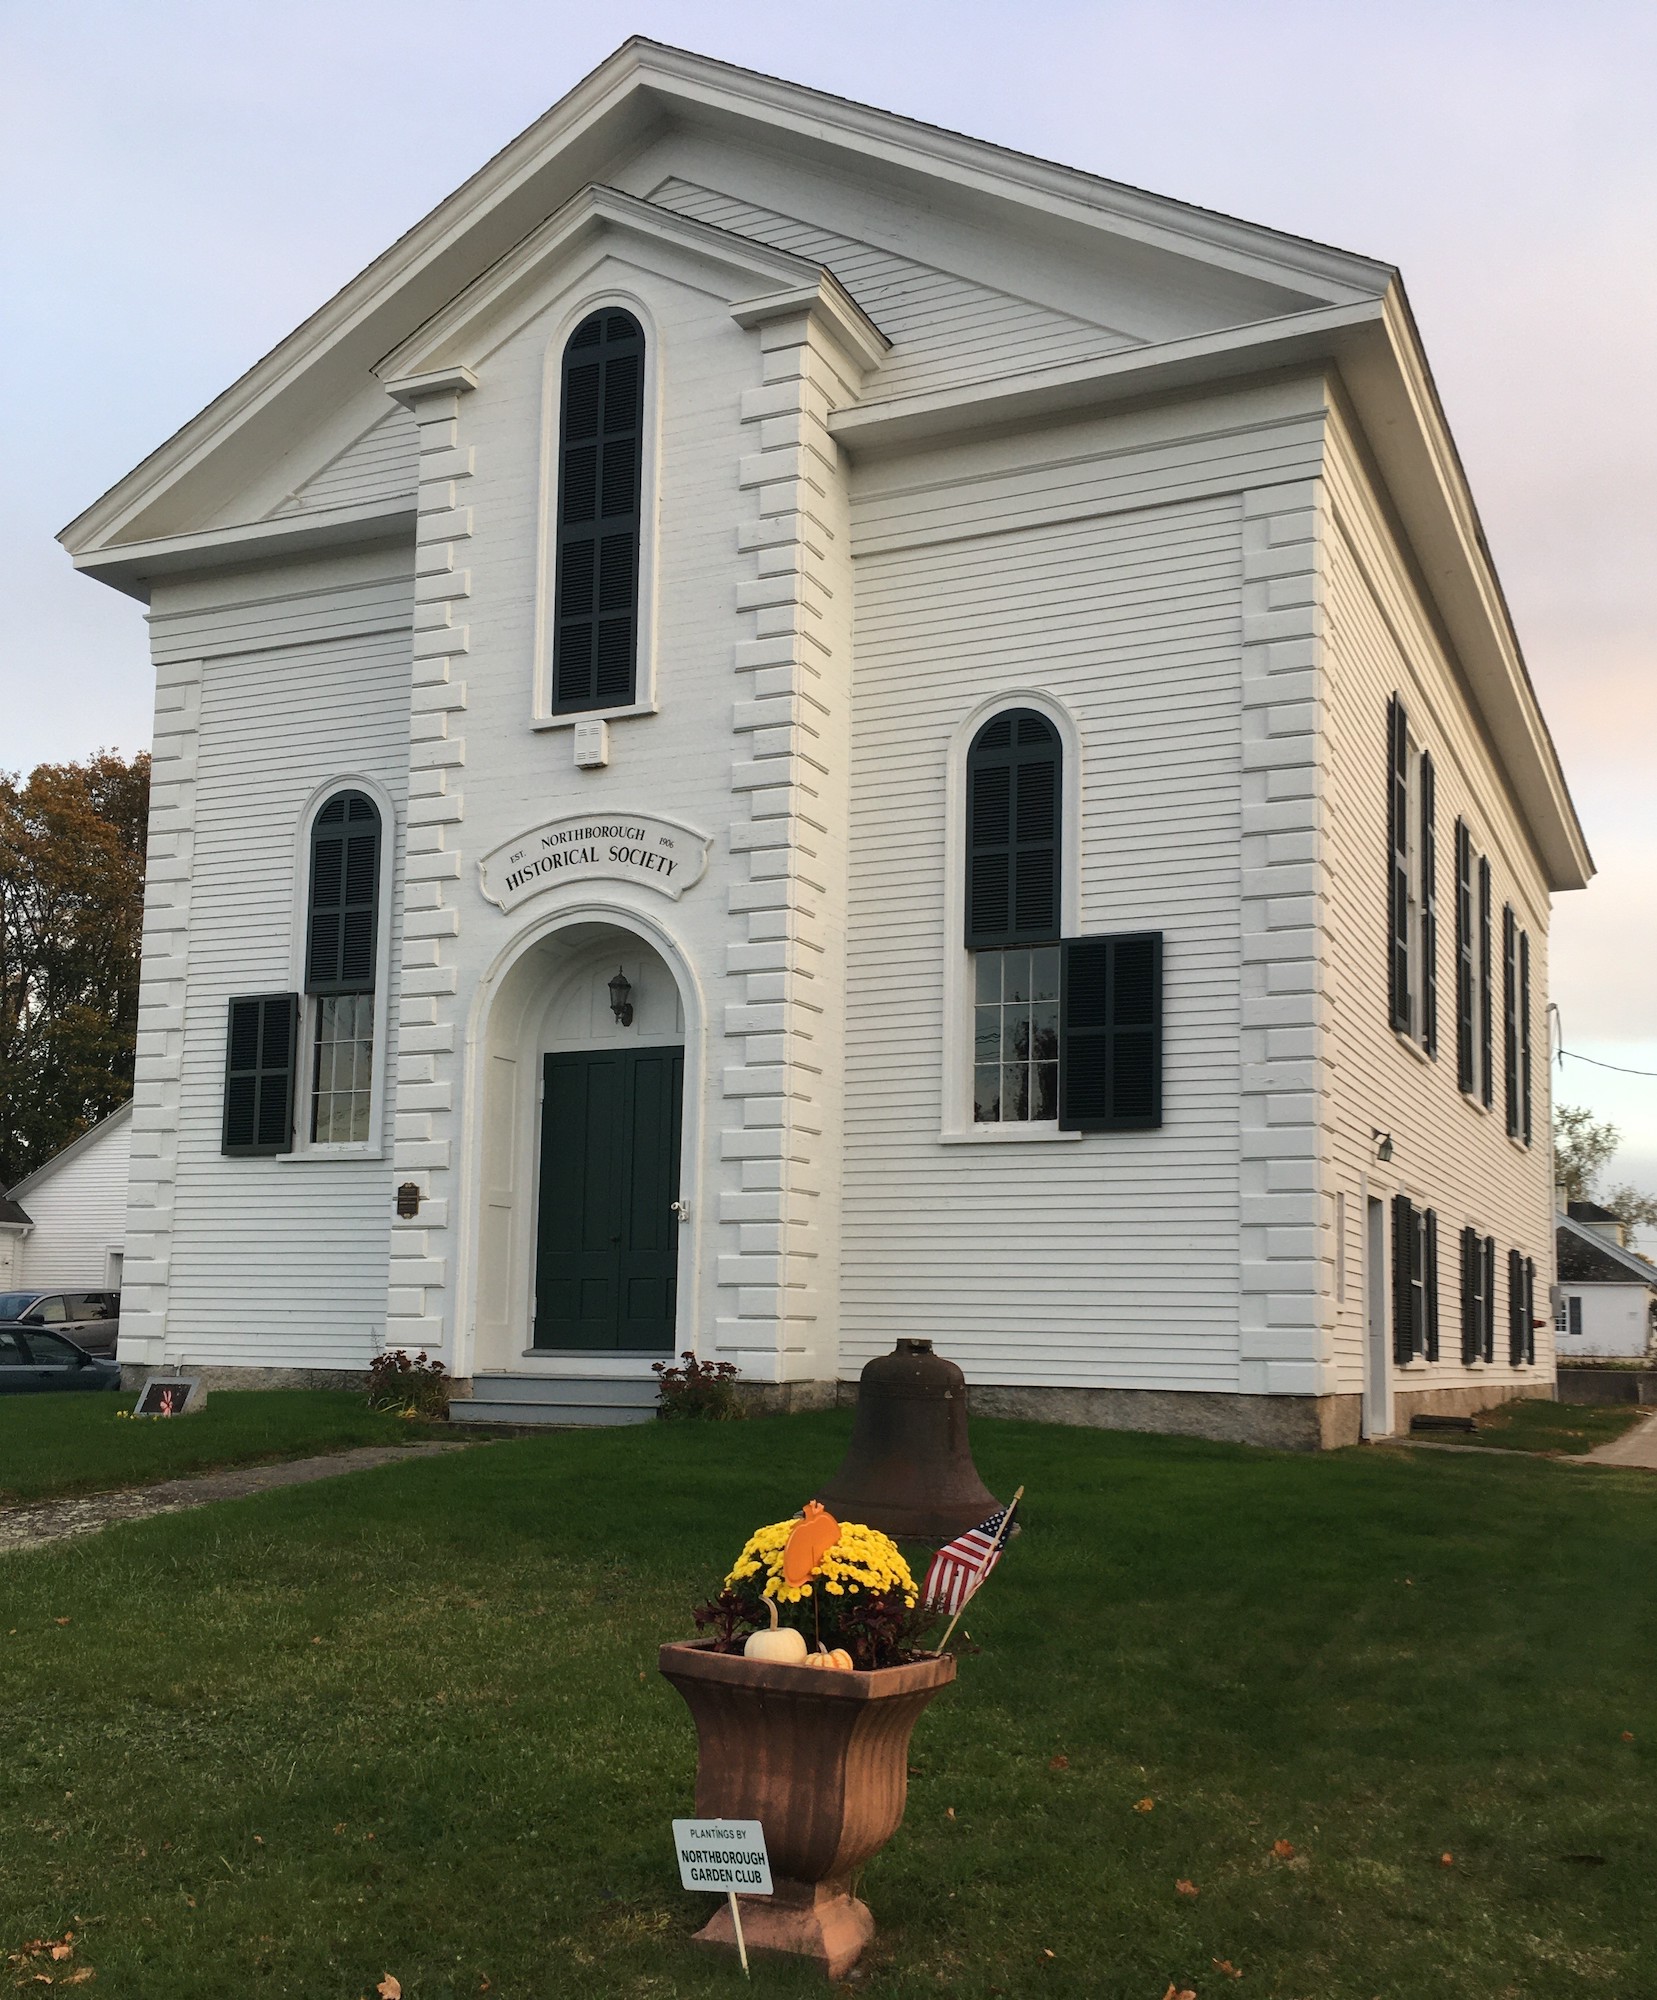 Northborough Historical Society building was once a Baptist church